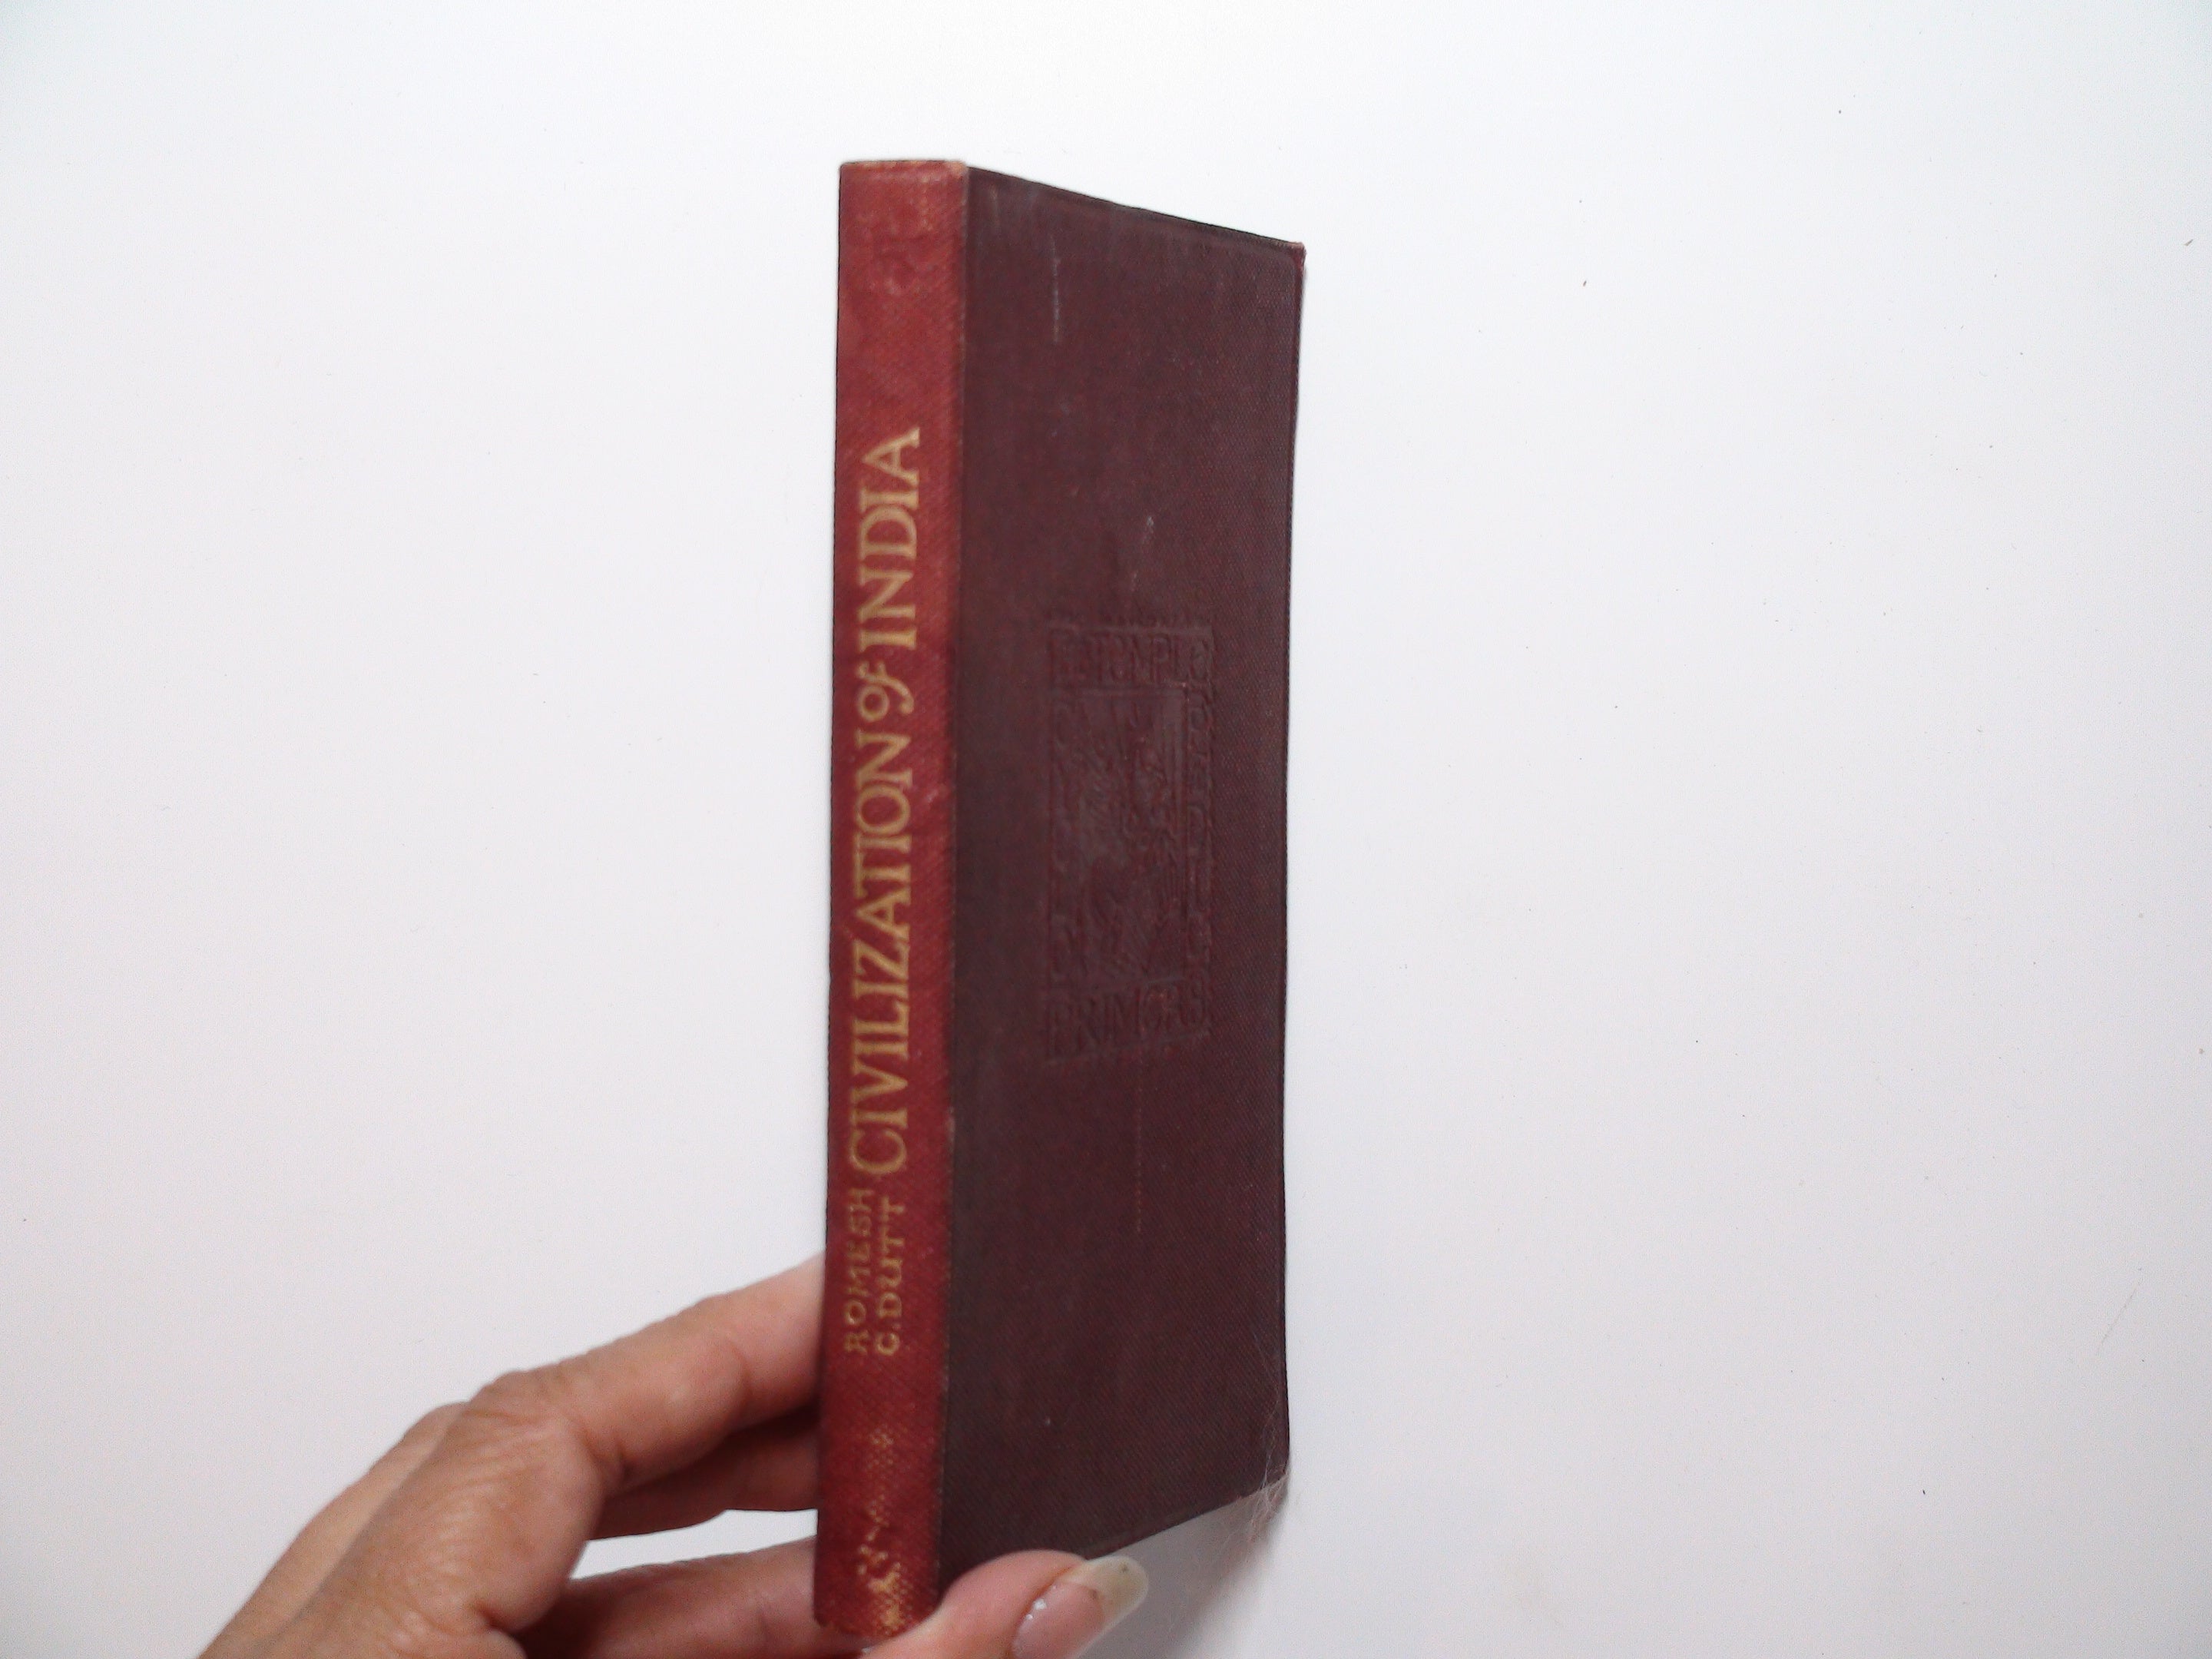 The Civilization of India, by Romesh C. Dutt, Illustrated, 1st Ed, 1900